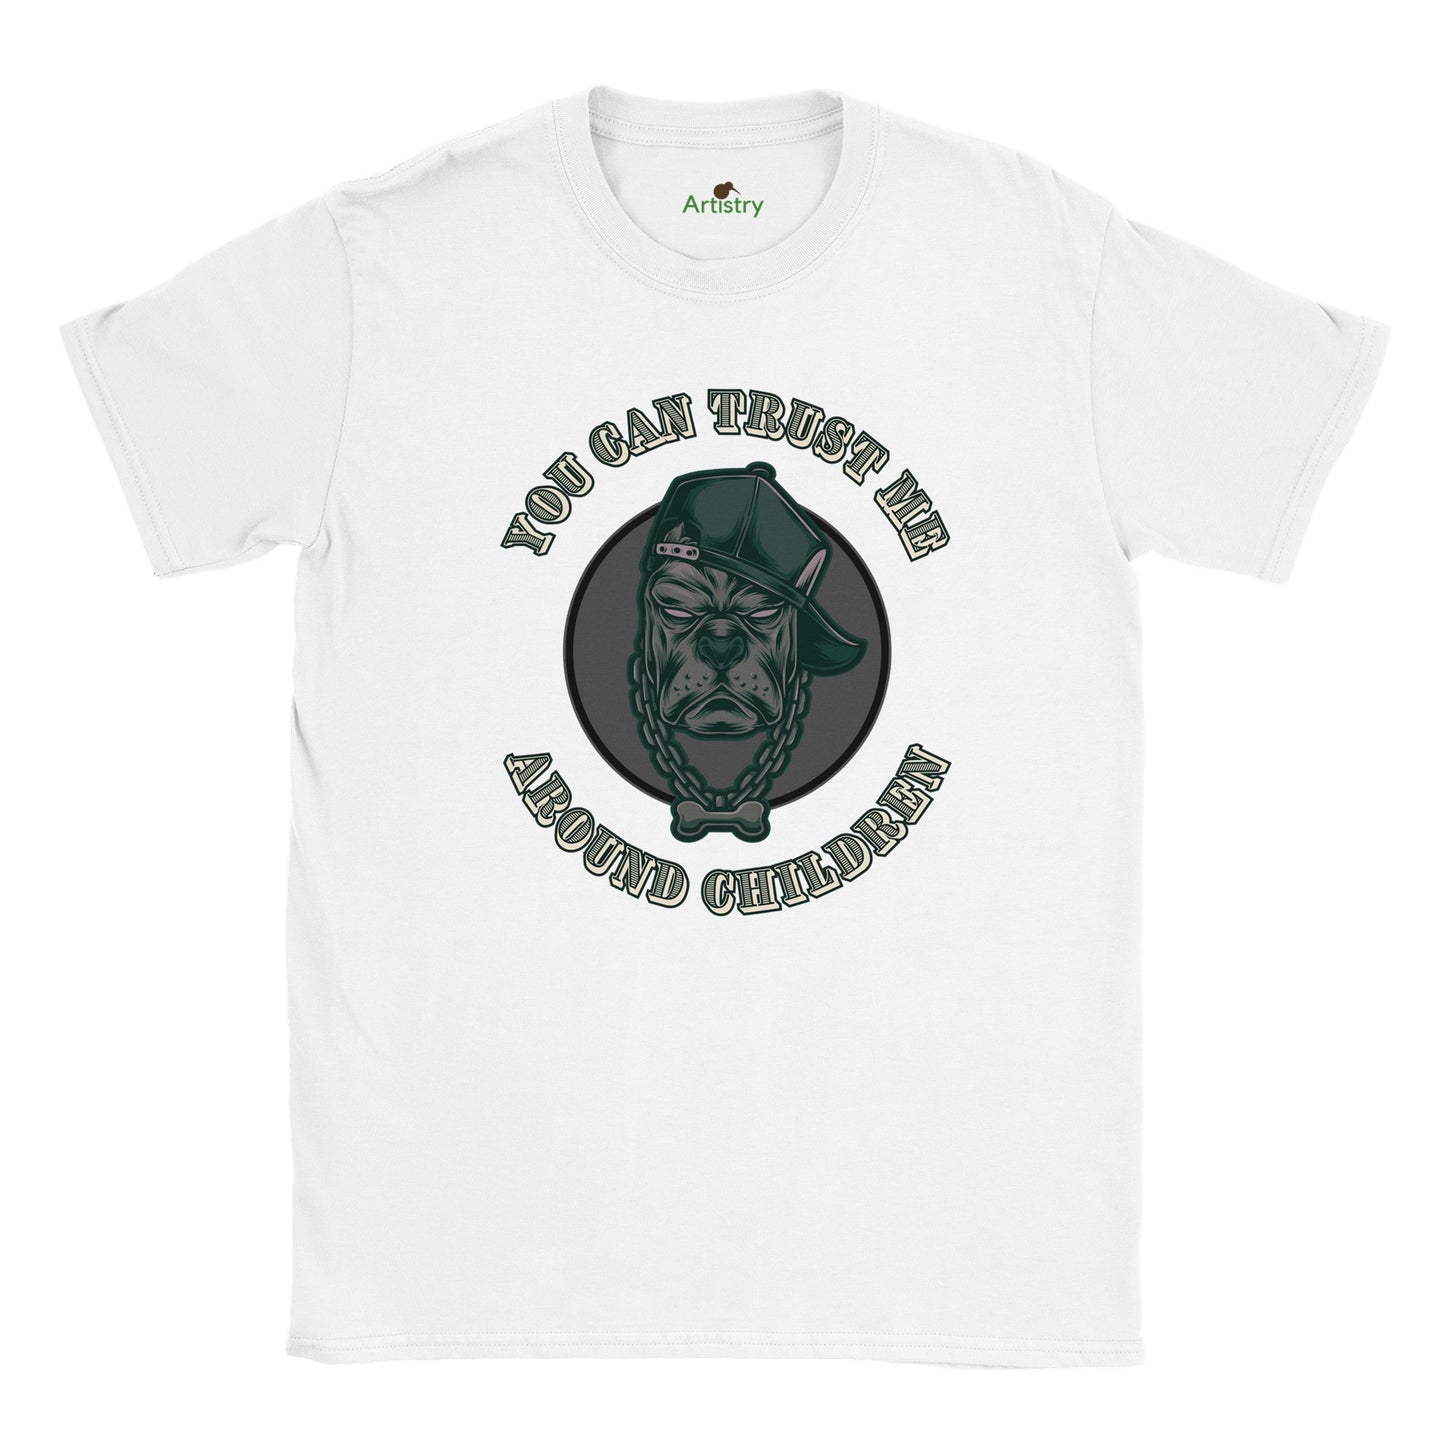 You Can Trust Me - T-shirt